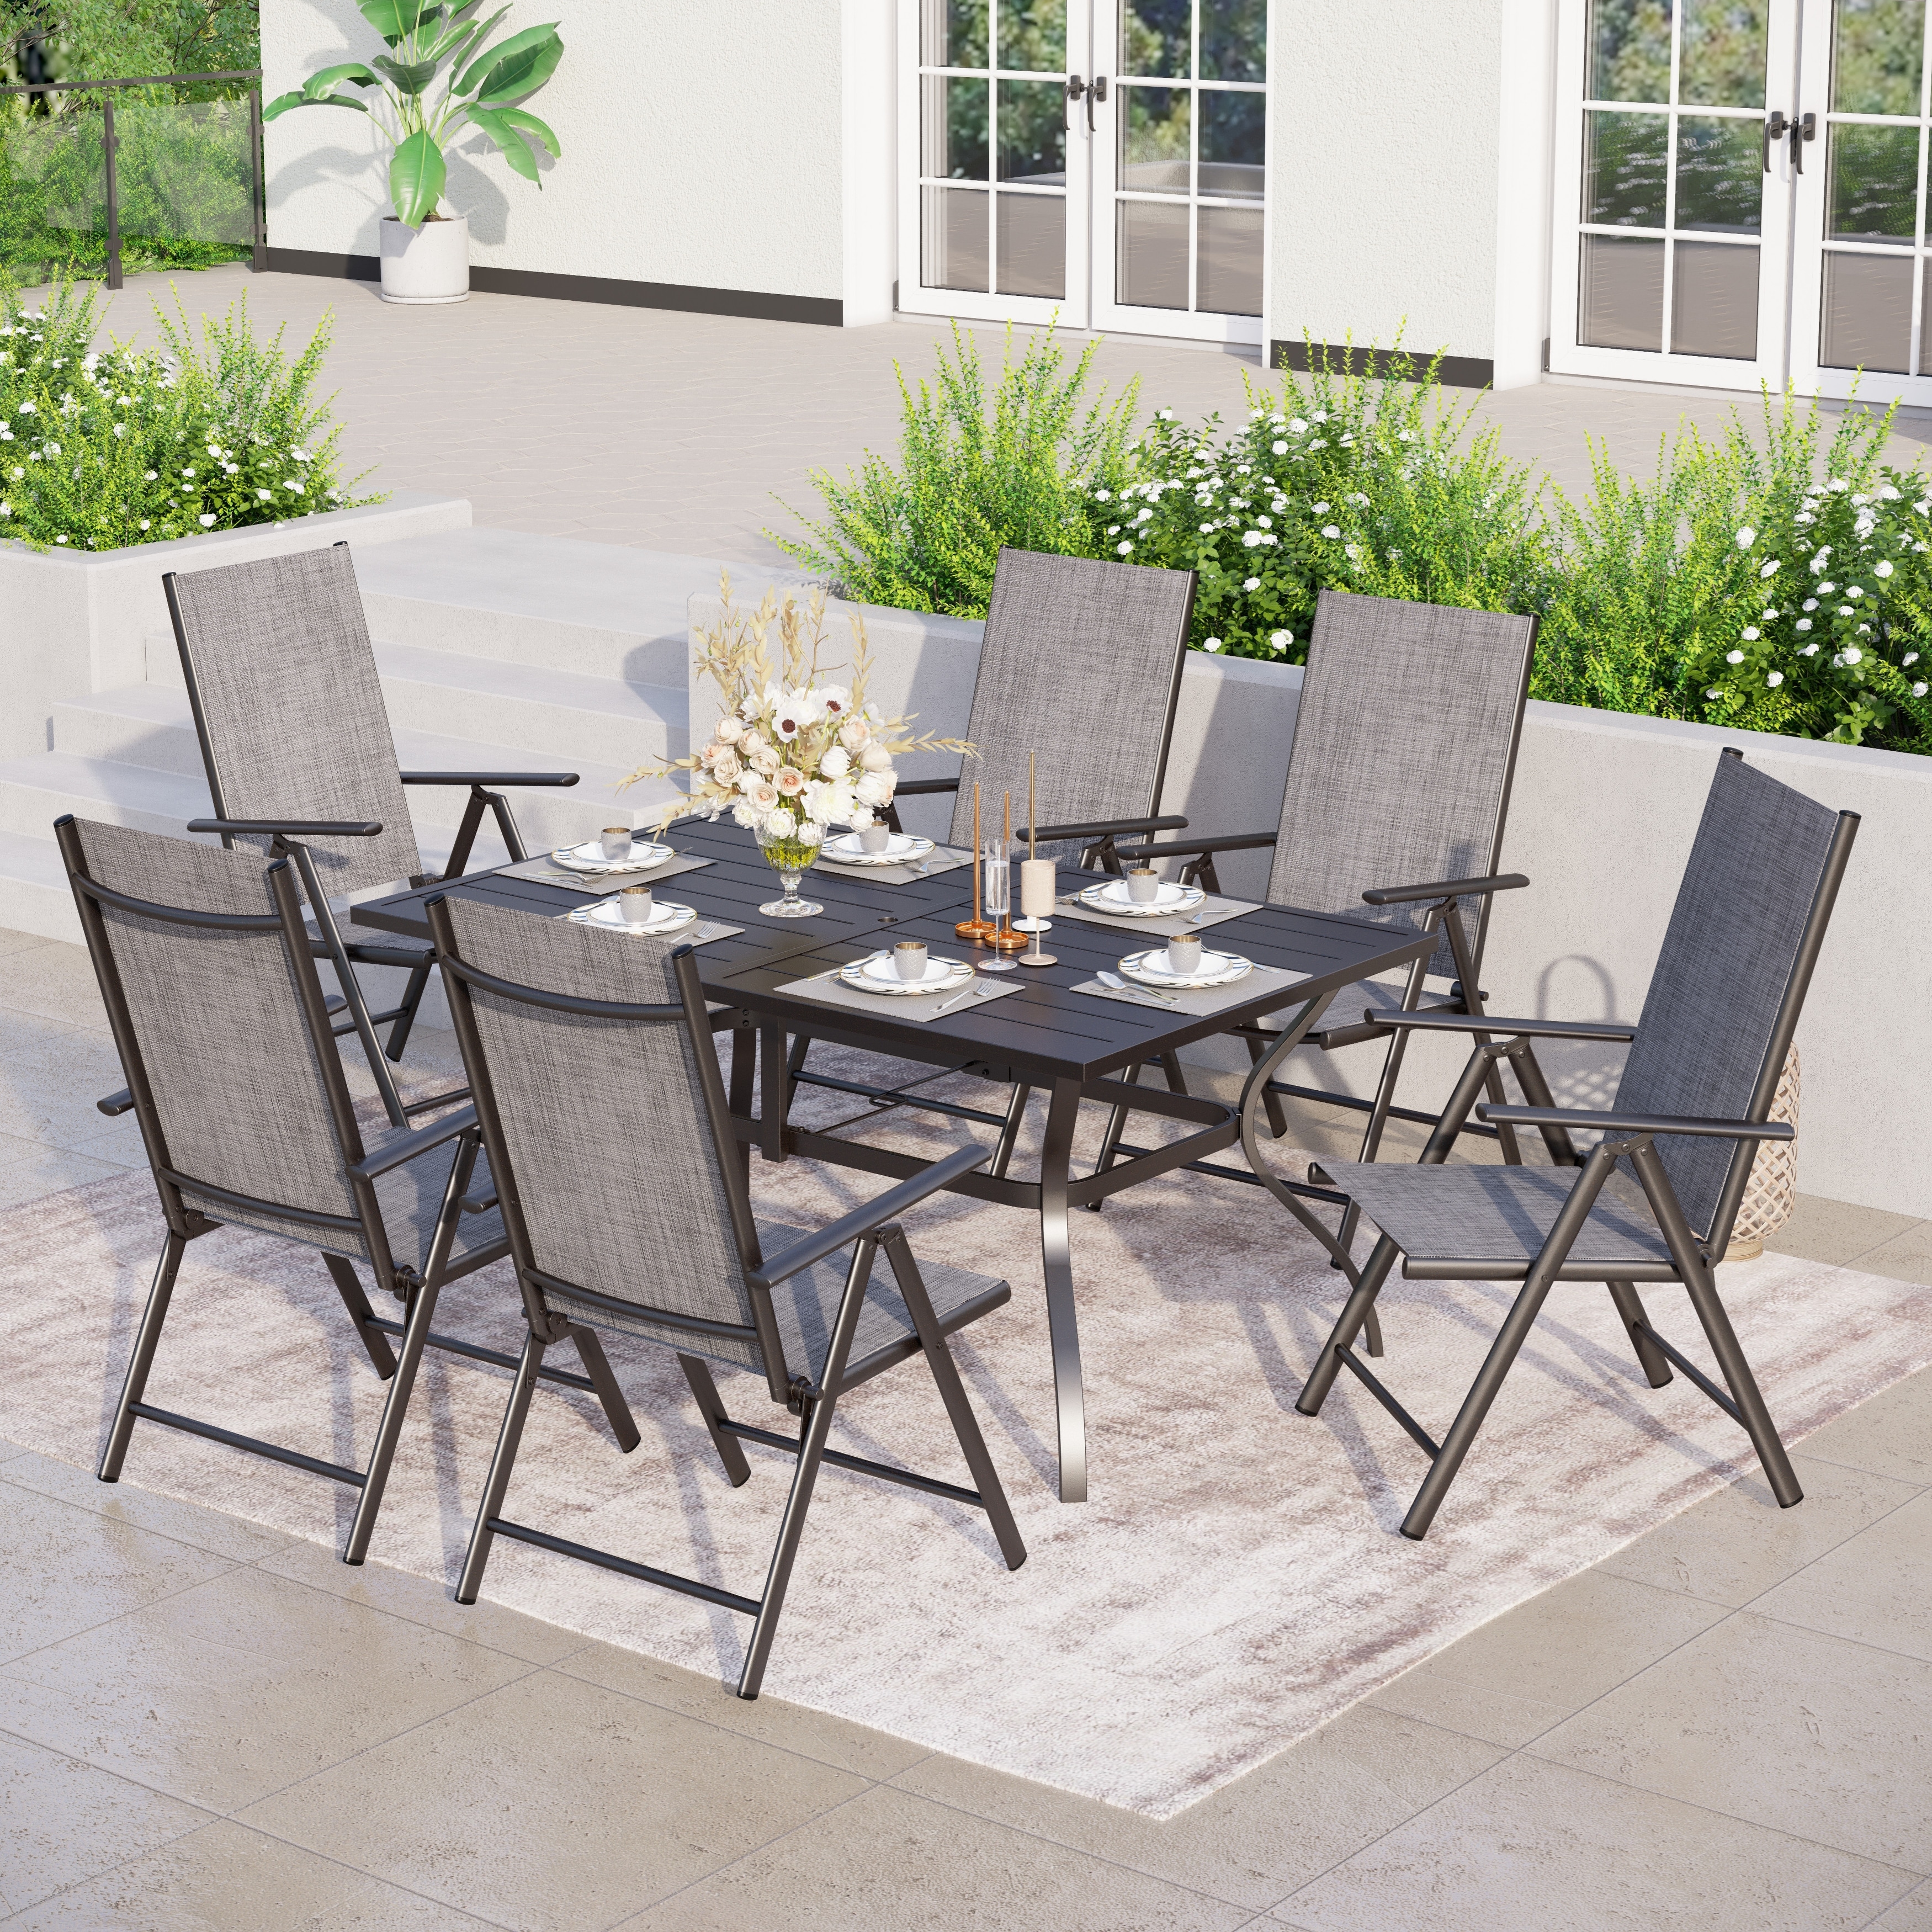 Mfstudio 7 Pieces Dining Set  6 X Reclining Folding Sling Dining Chairs And 1 X Table With An Umbrella Hole